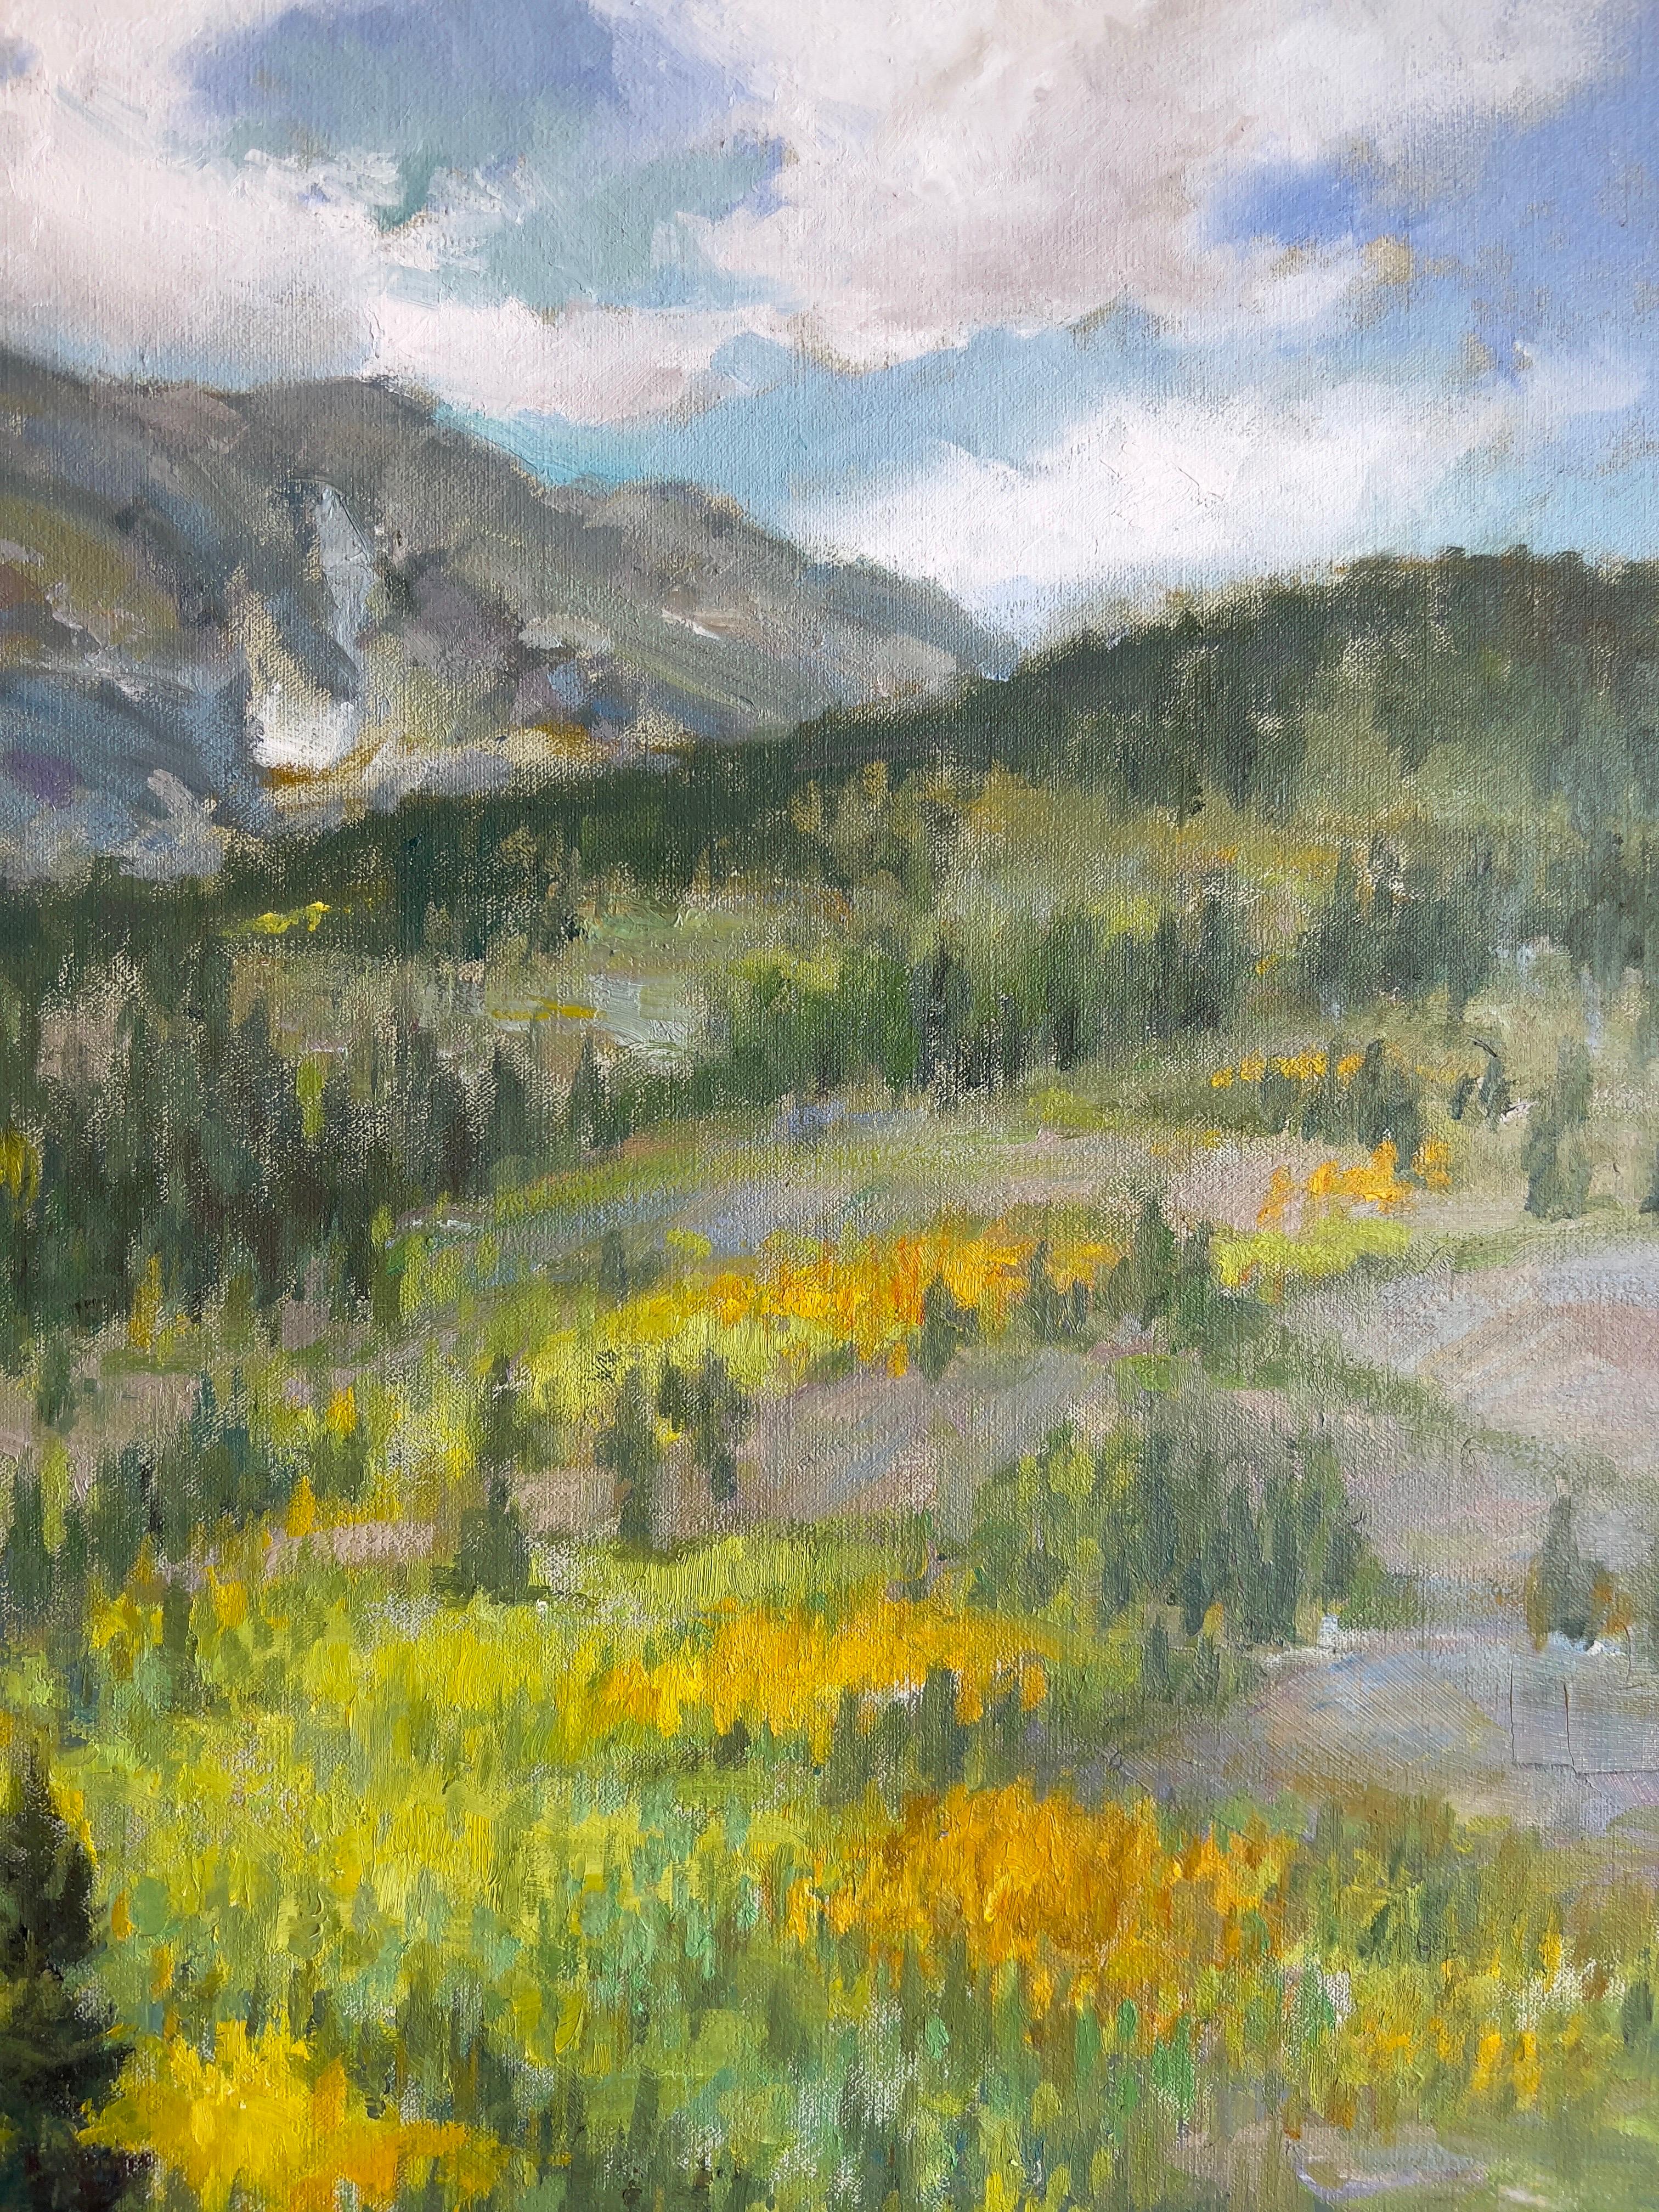 Going up to Silverton Canyon, Santa Ana mountains. - Gray Landscape Painting by Lynn Gertenbach